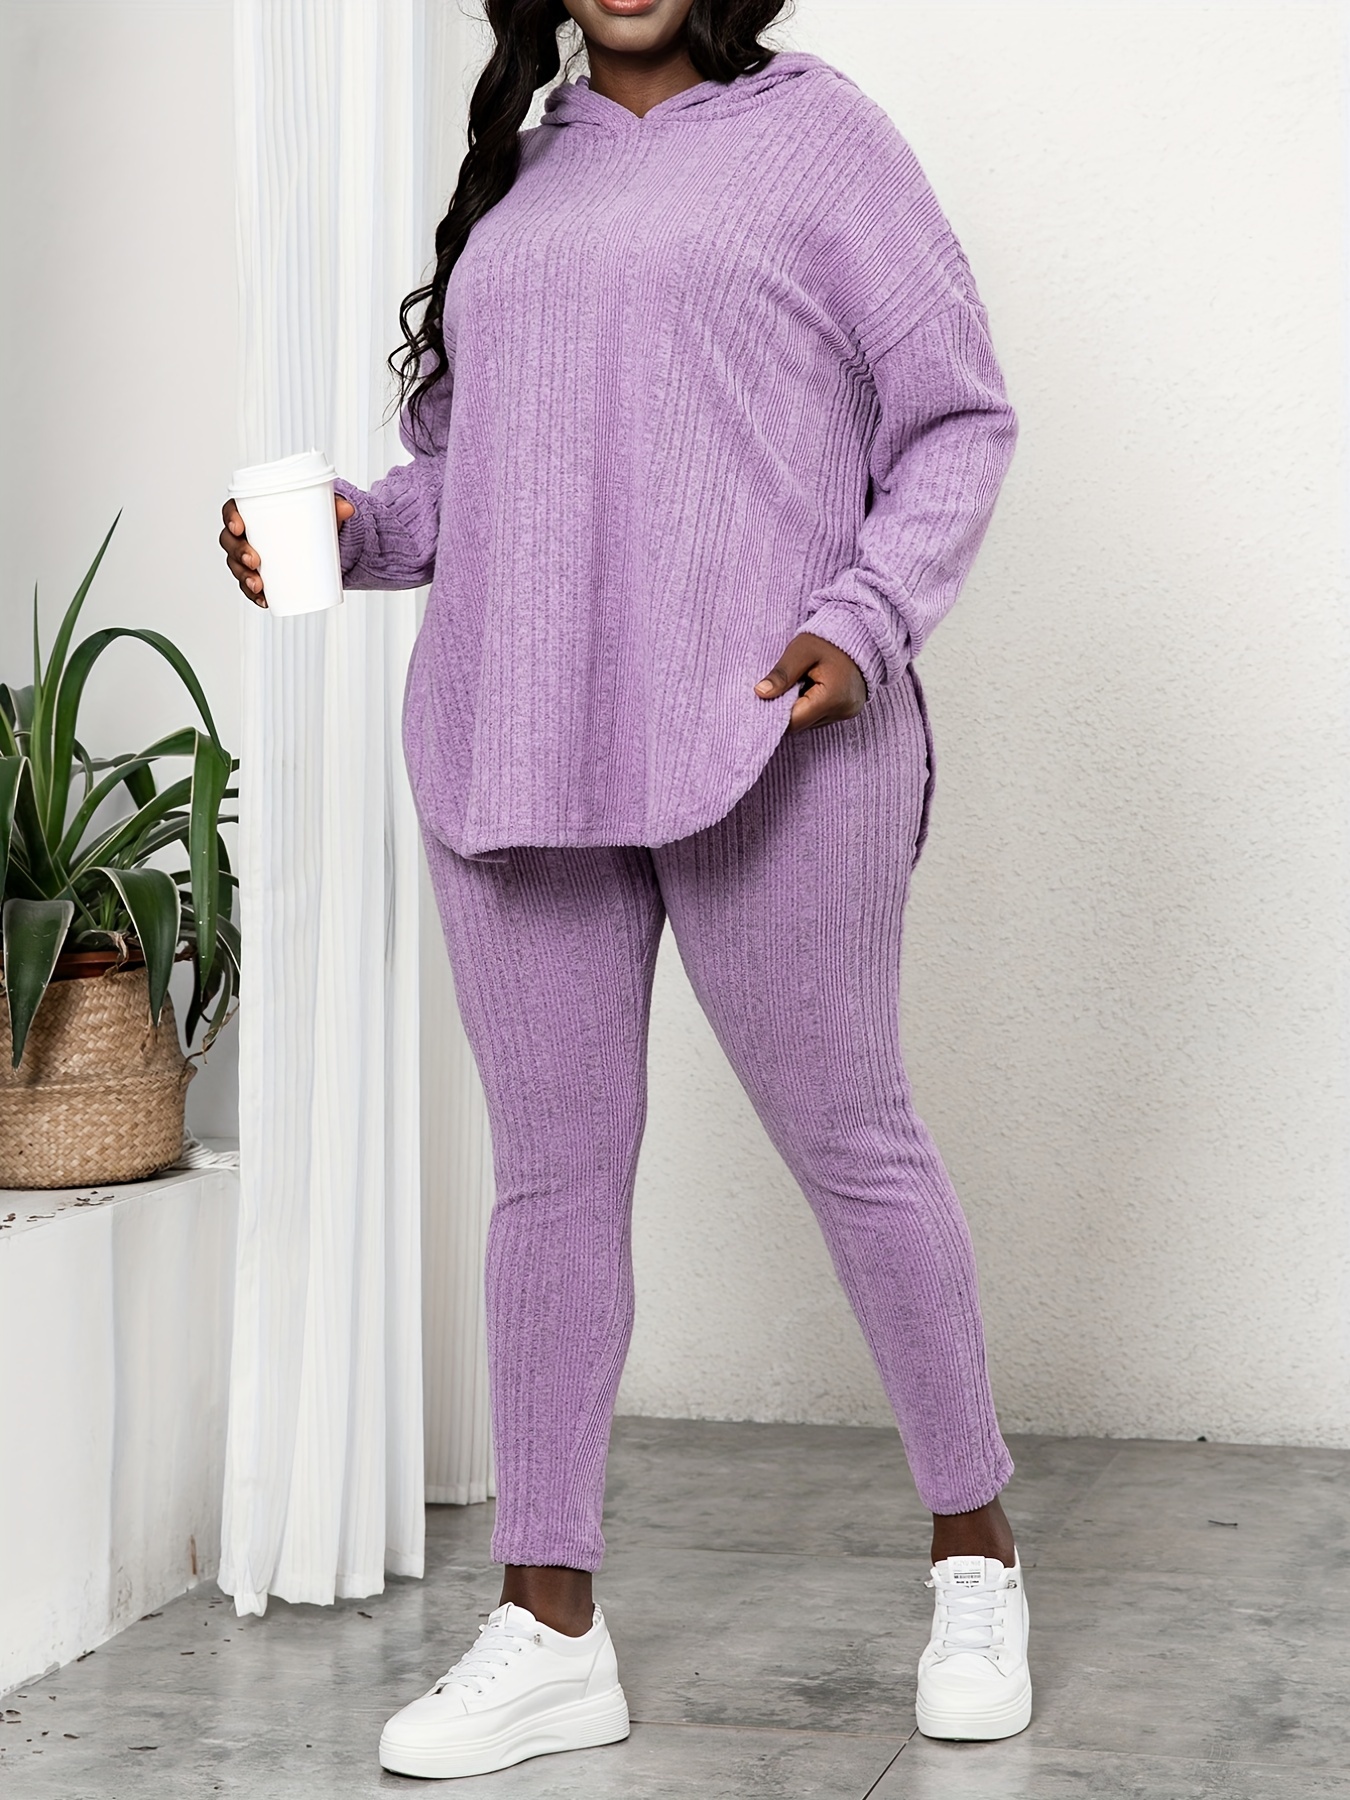 Dropship Plus Size Rib Knit Solid Long Sleeve Hoodie Tops & Leggings Set;  Women's Plus High Stretch Casual 2pcs Set Co-ords to Sell Online at a Lower  Price